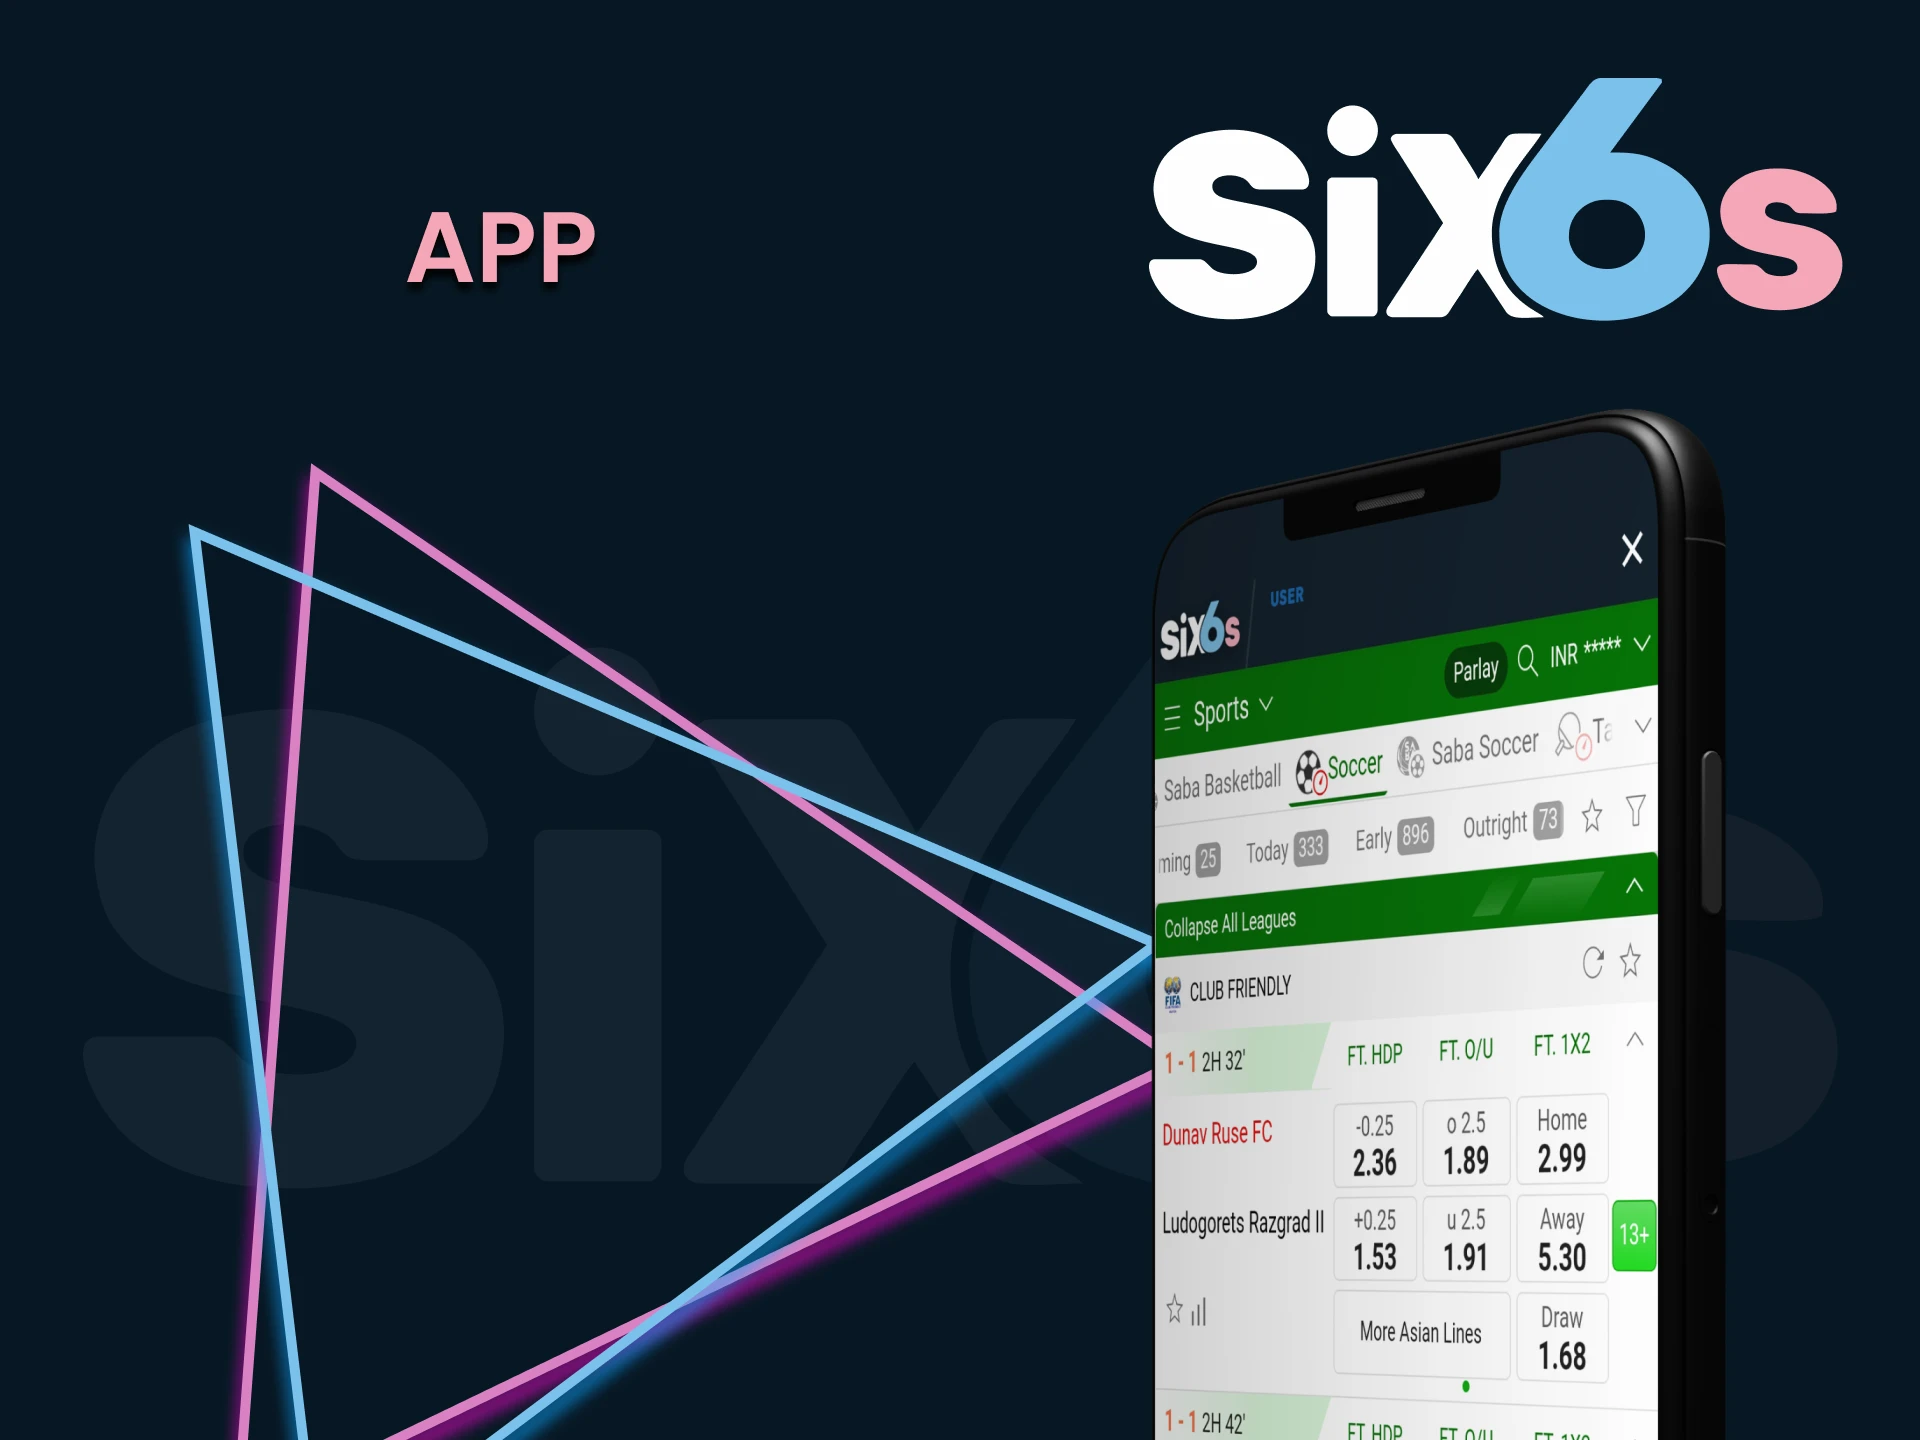 By downloading the Six6s app you can bet on football on your phone.